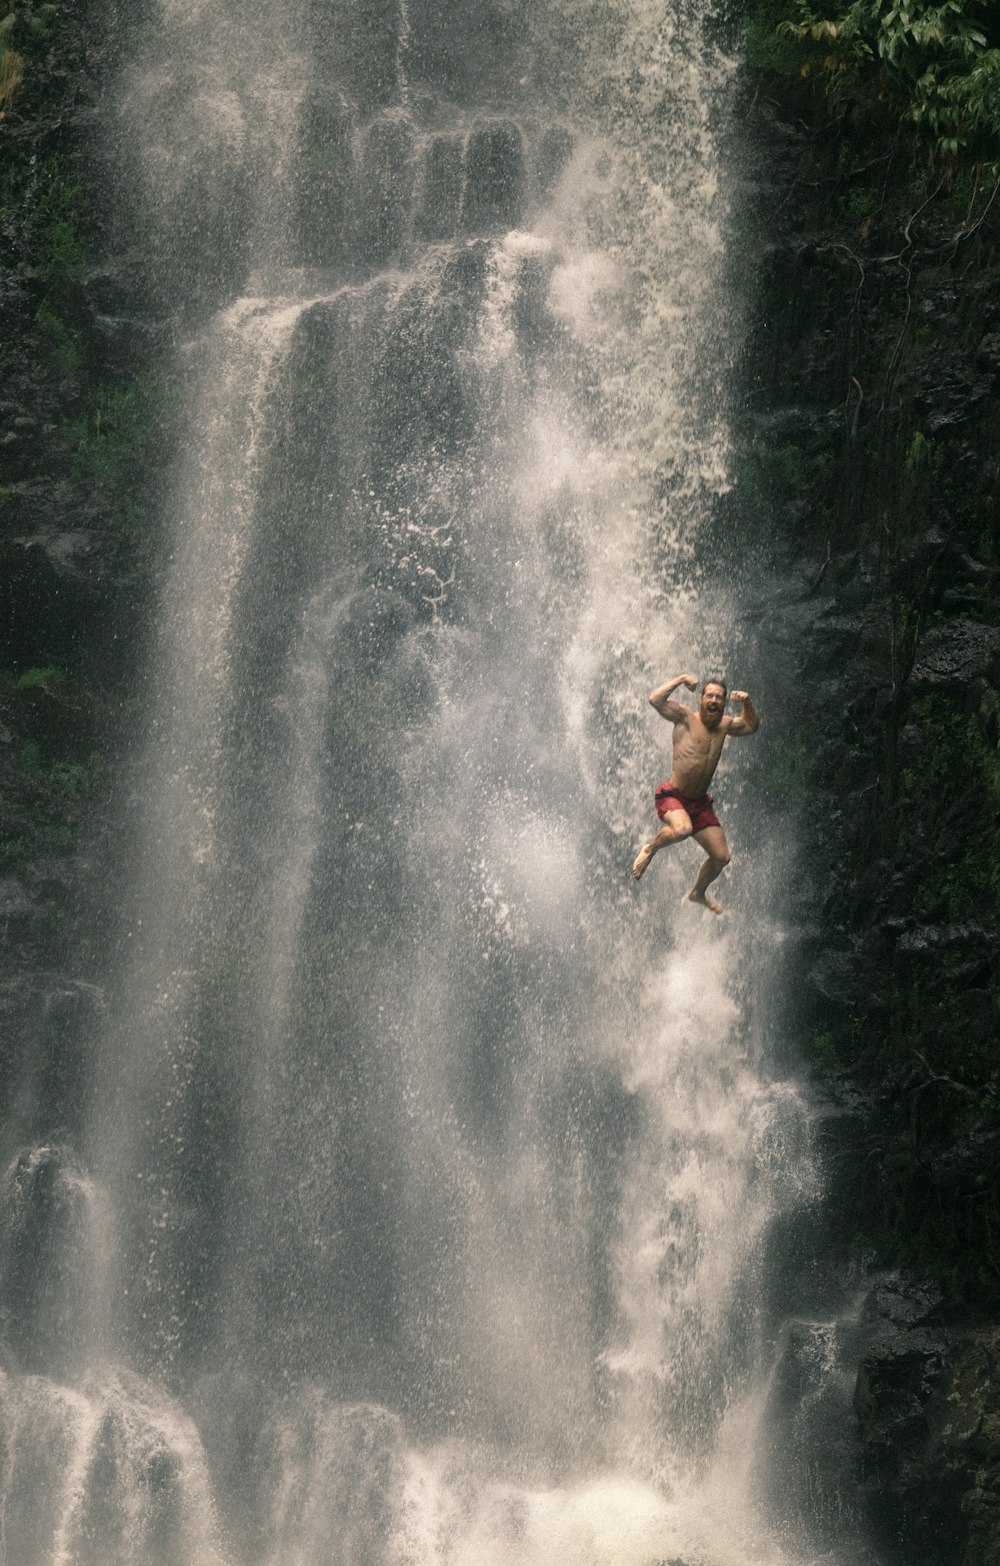 man in red shorts jumping along water